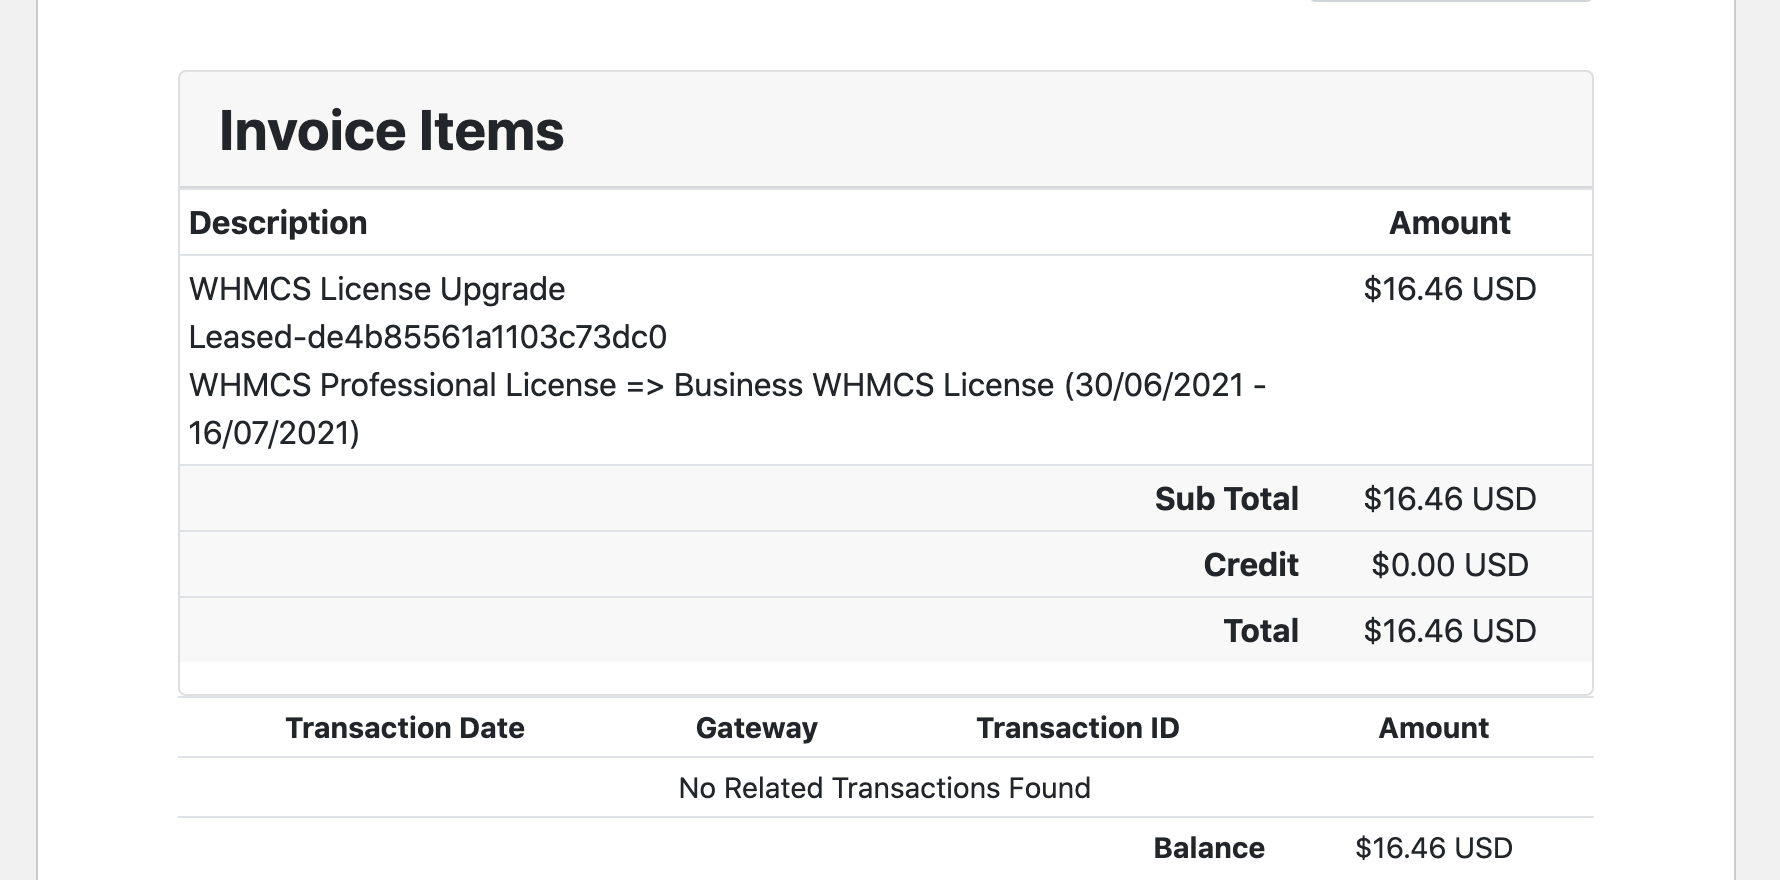 Whmcs-rlm-upgrade-invoice.png